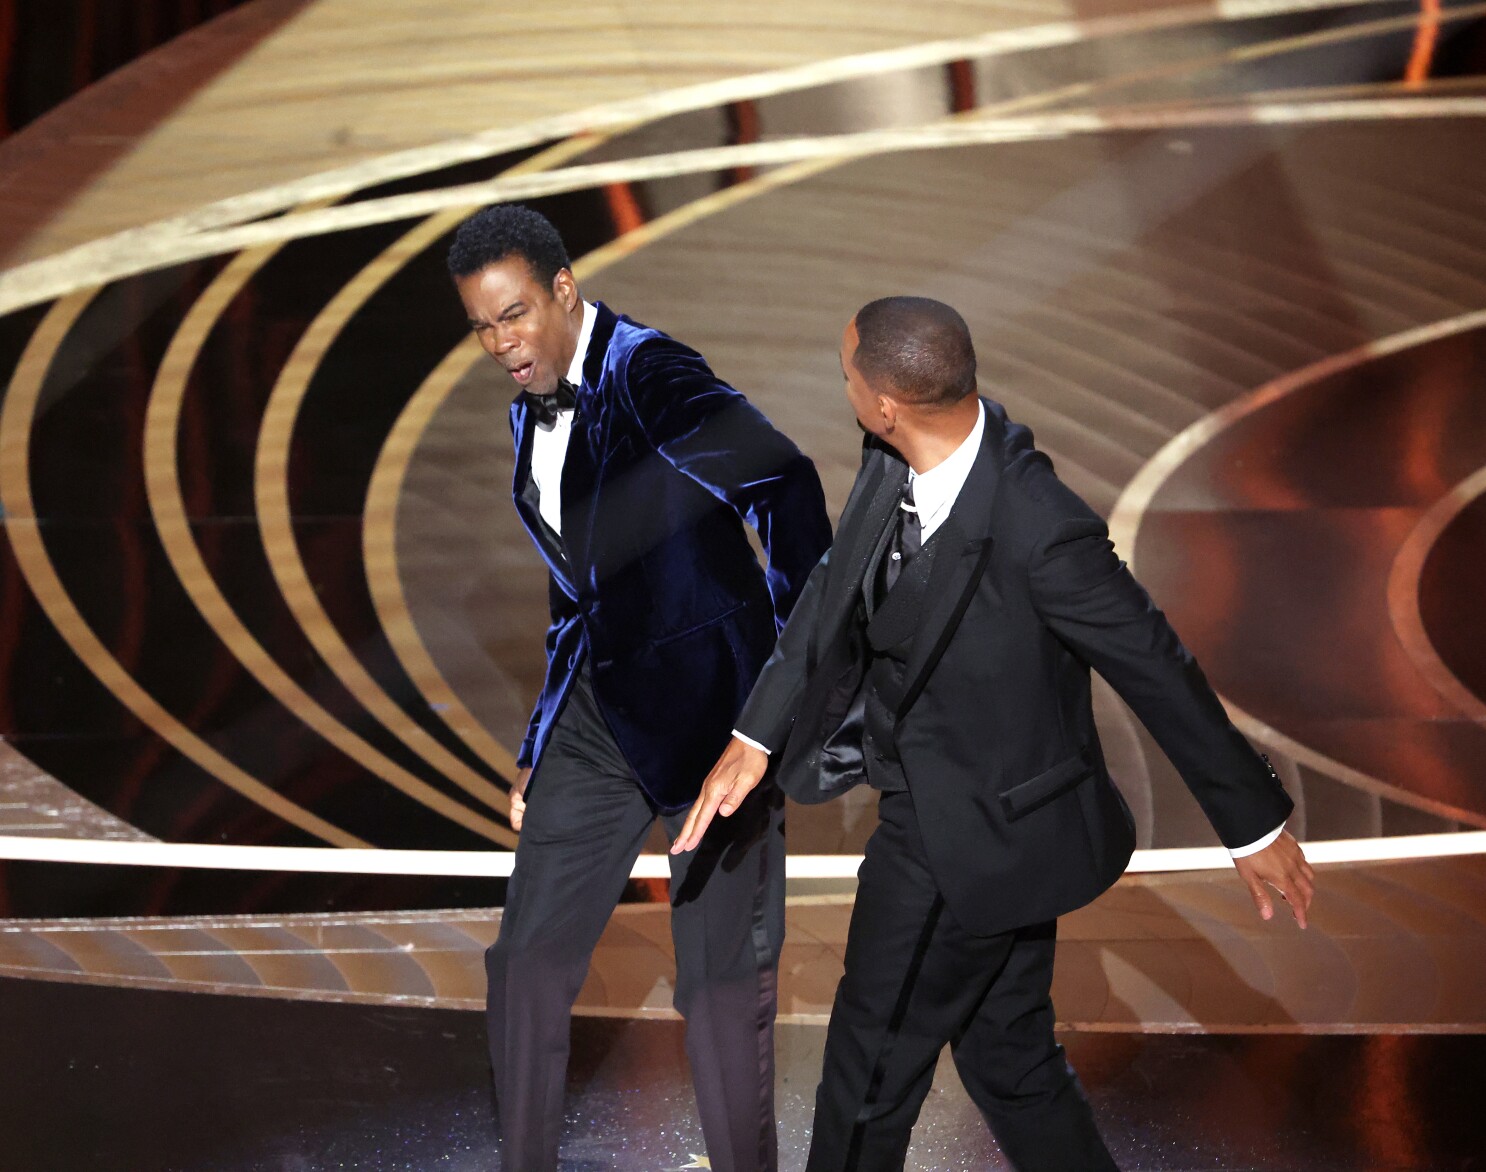 The Popular Fresh Prince Will Smith Punches Chris Rock at Oscars 2022, Later Apologizes In His Teary Acceptance Speech